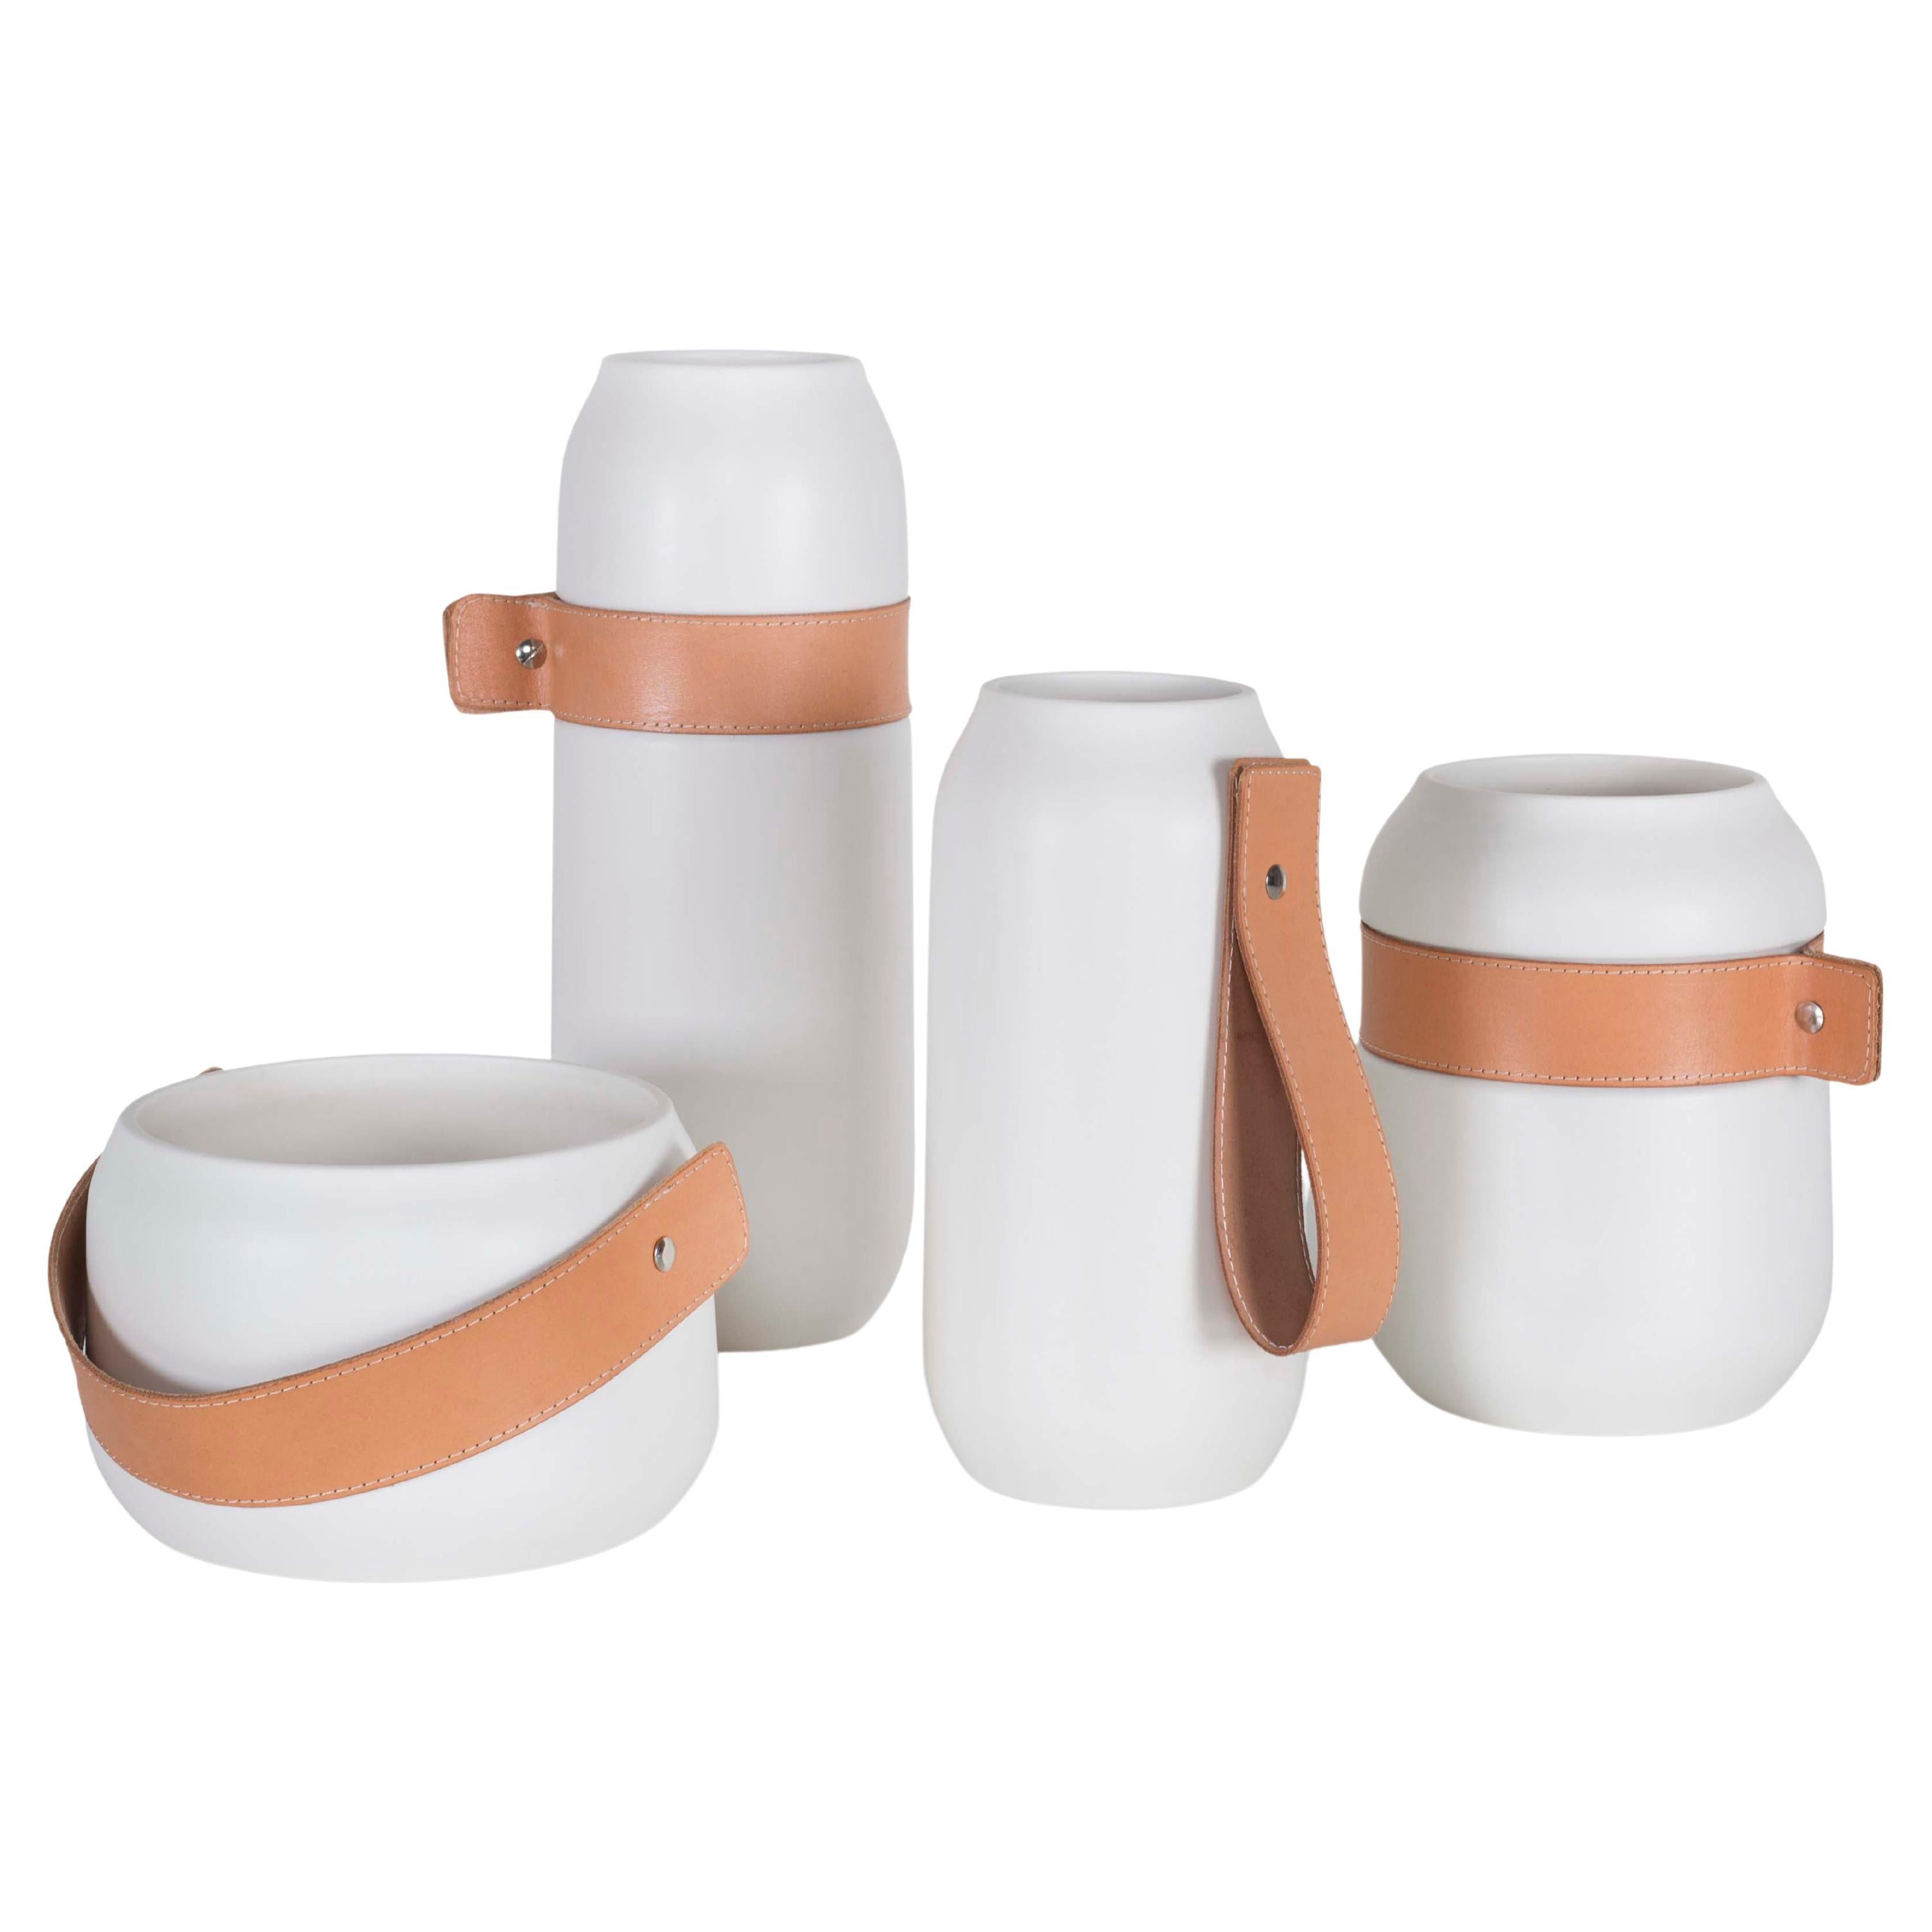 Set/4 Ceramic Vases w/ Leather, White, Handmade in Portugal by Lusitanus Home For Sale